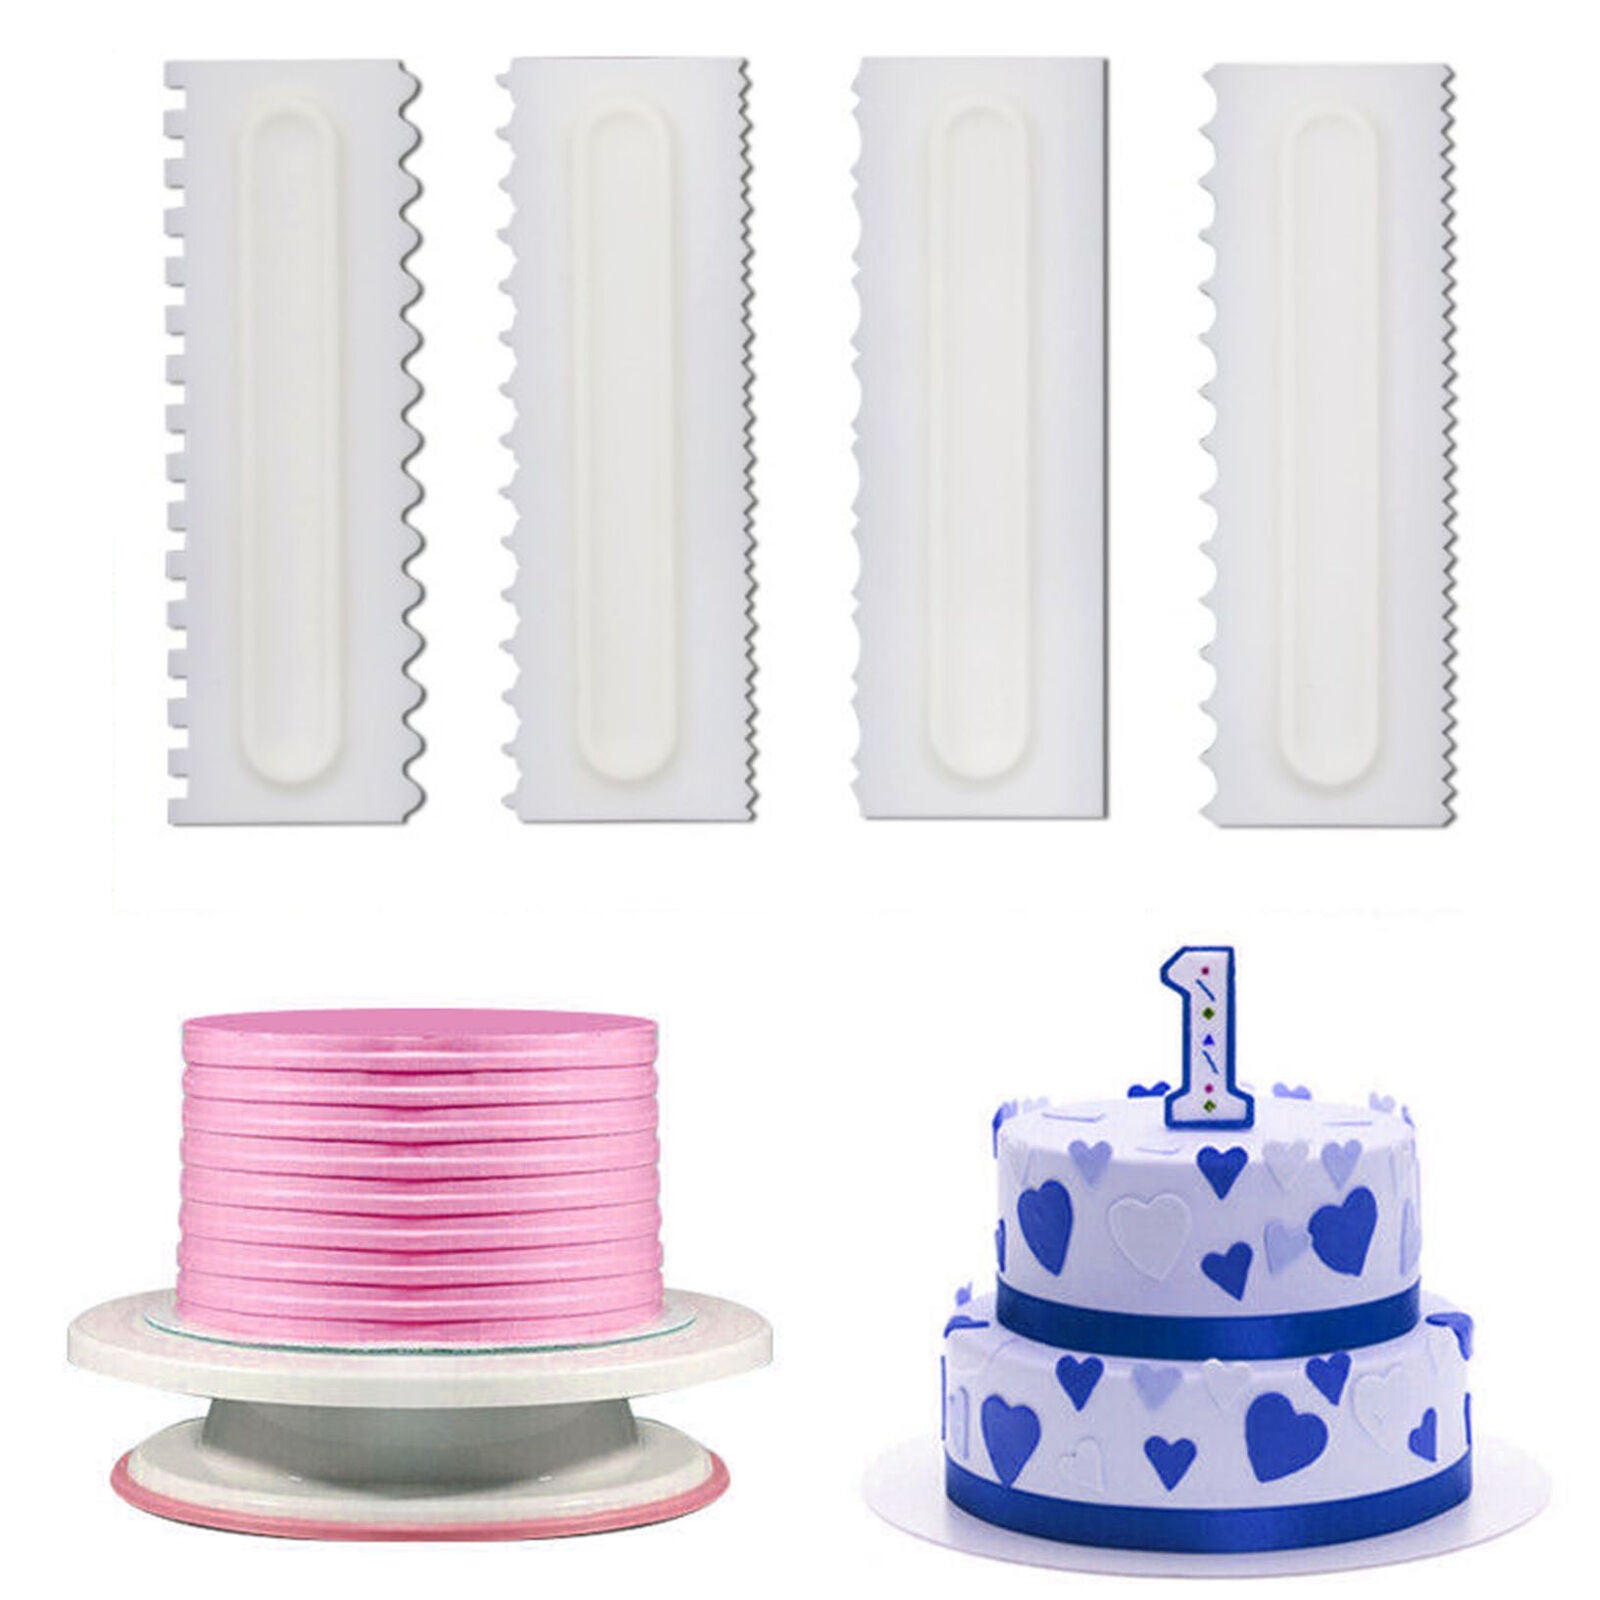 4Pcs Cake Decorating Comb Icing Smoother Scraper Edge Frosting Tool Spatula Set